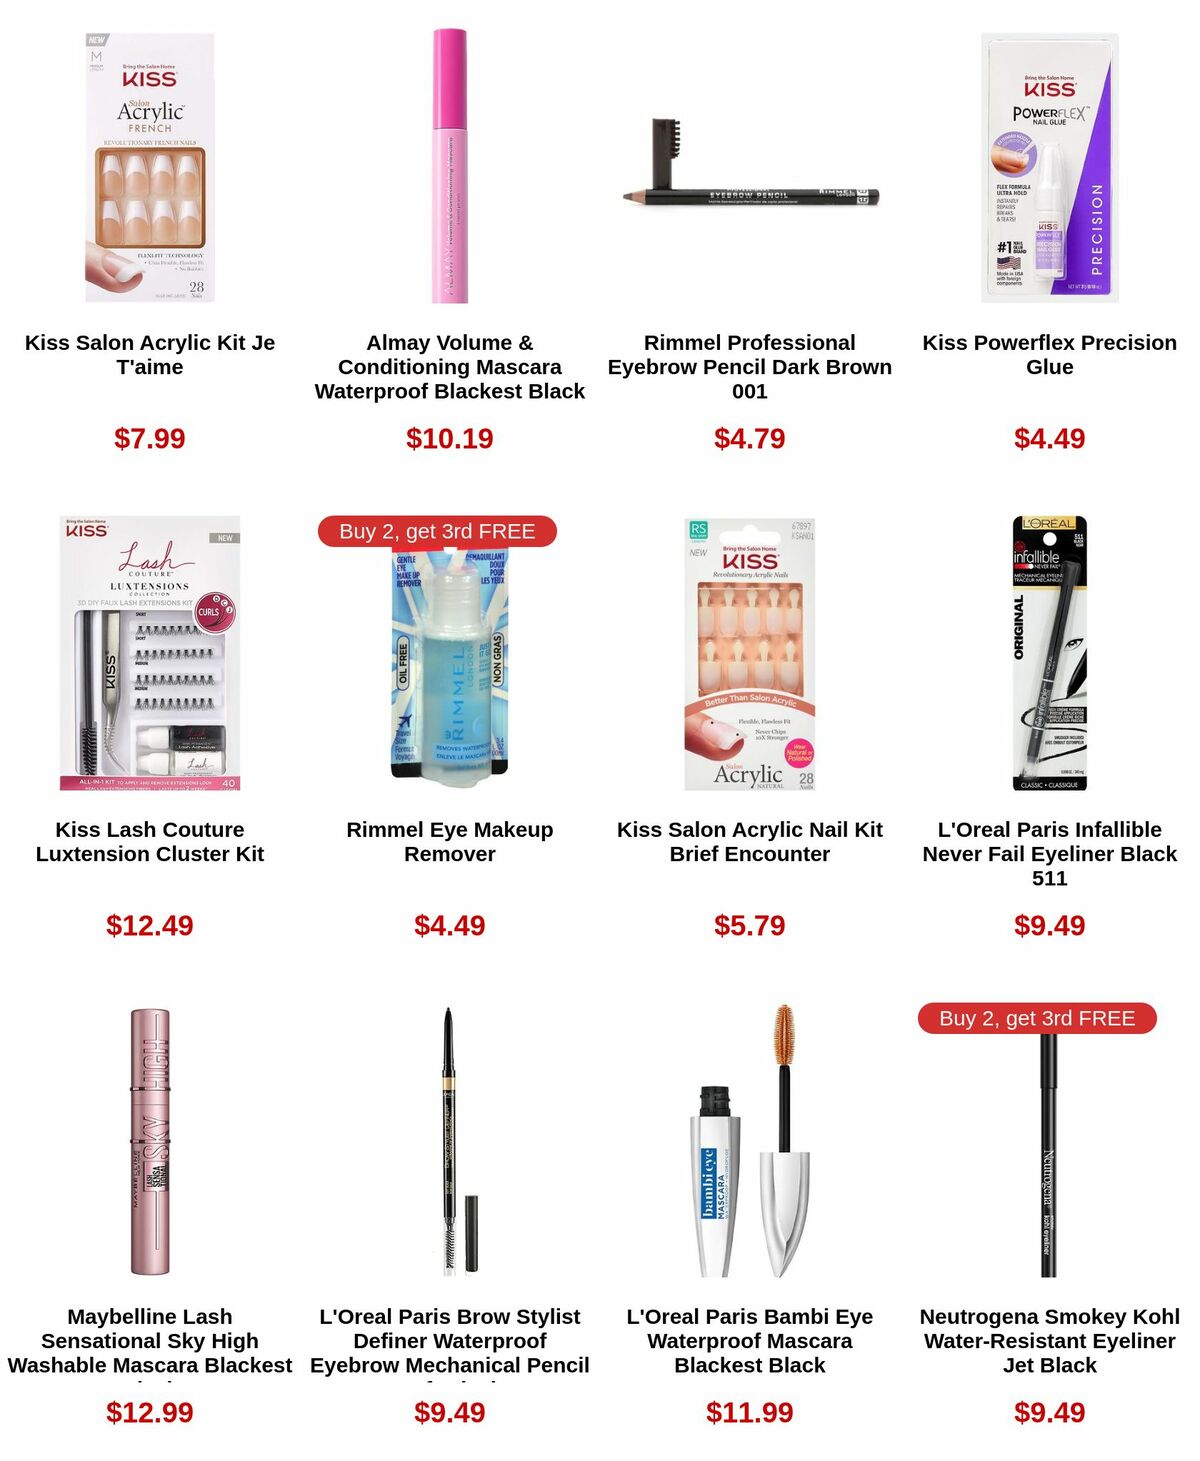 Walgreens Buy 2, get 3rd FREE Weekly Ad from February 26